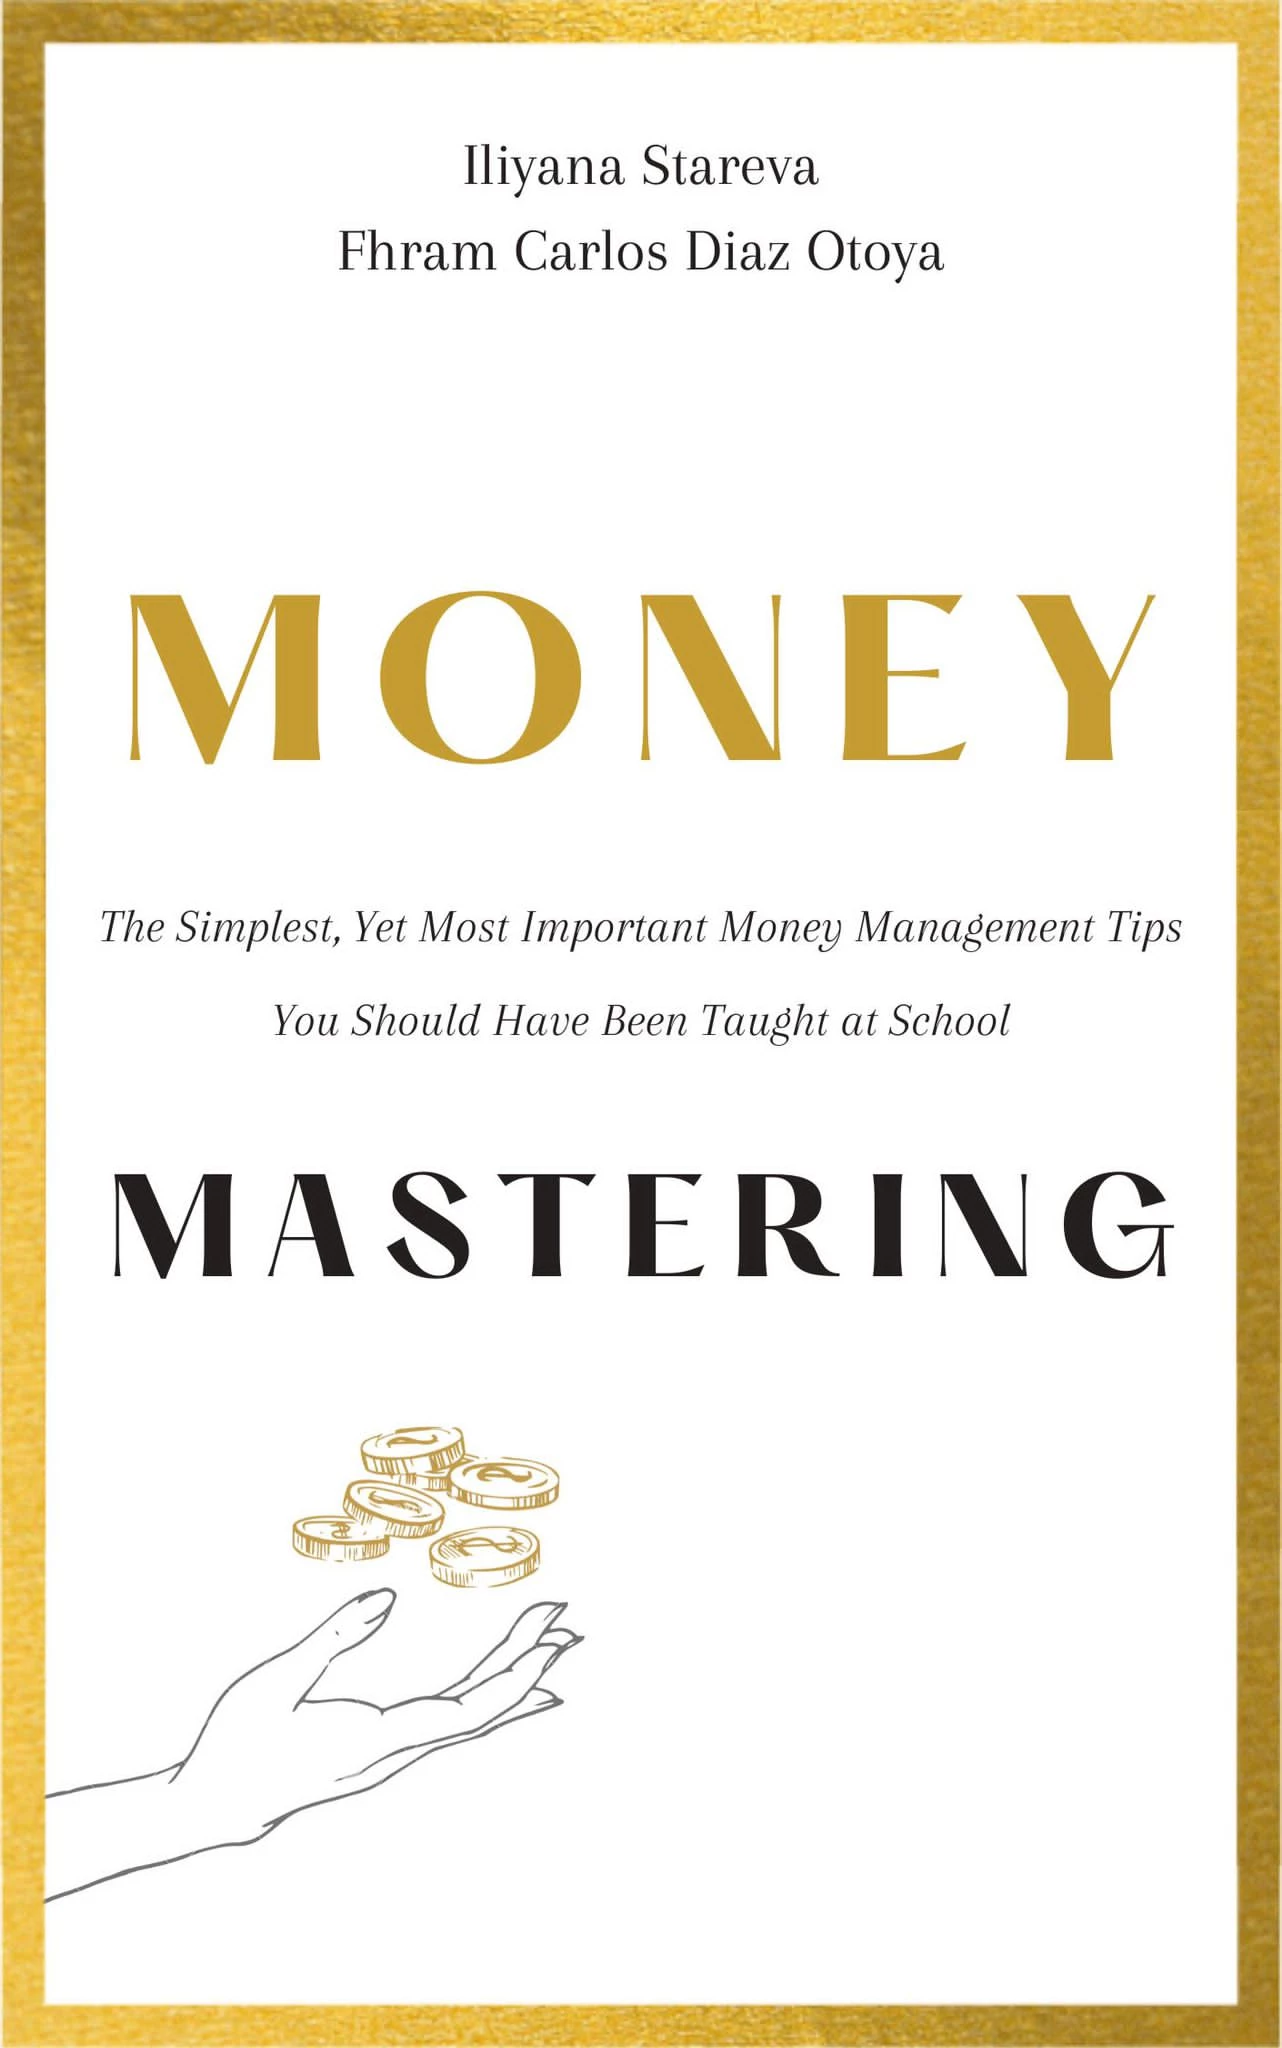 oney Mastering: The Simplest, Yet Most Important Money Management Tips You Should Have Been Taught at School